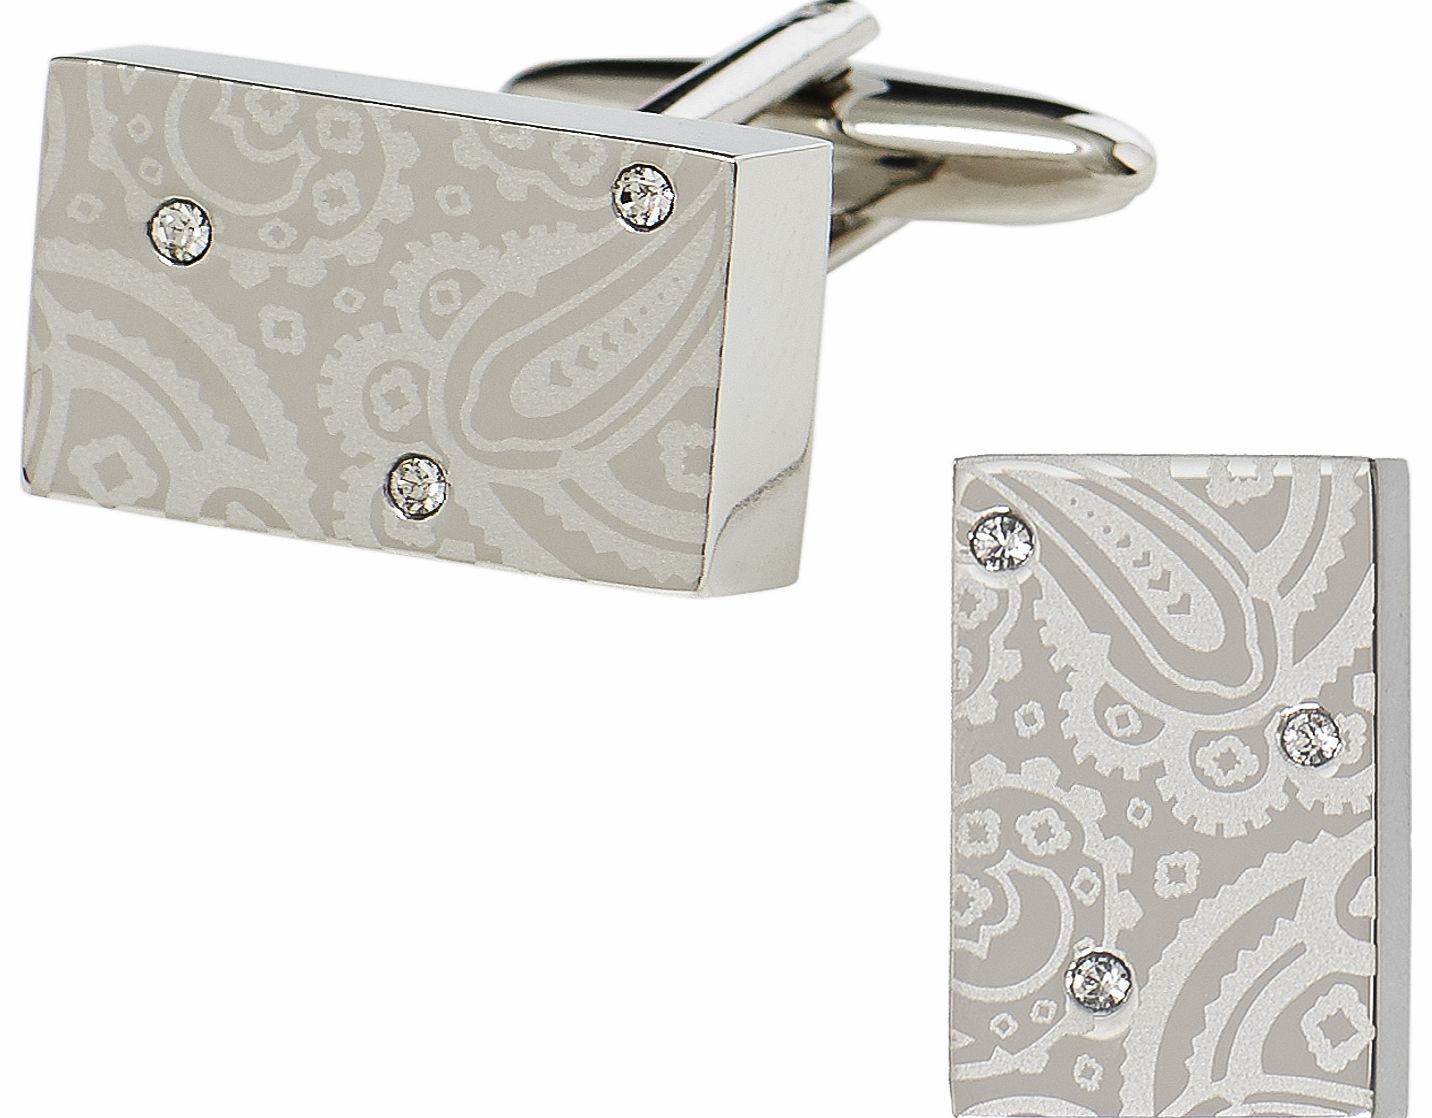 Moss 1851 Silver Paisley Etched Cufflinks